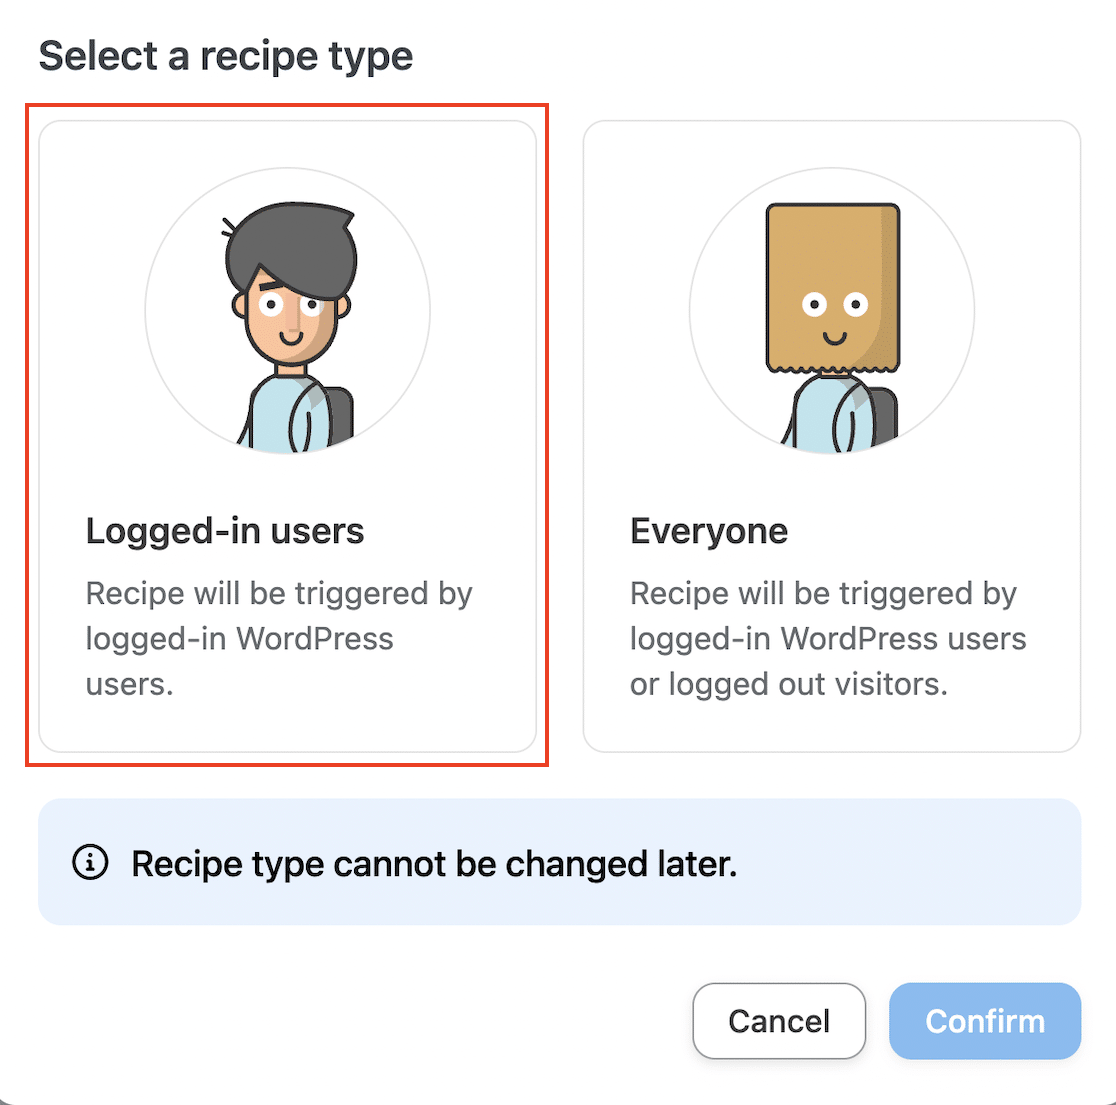 Create recipe for logged-in users